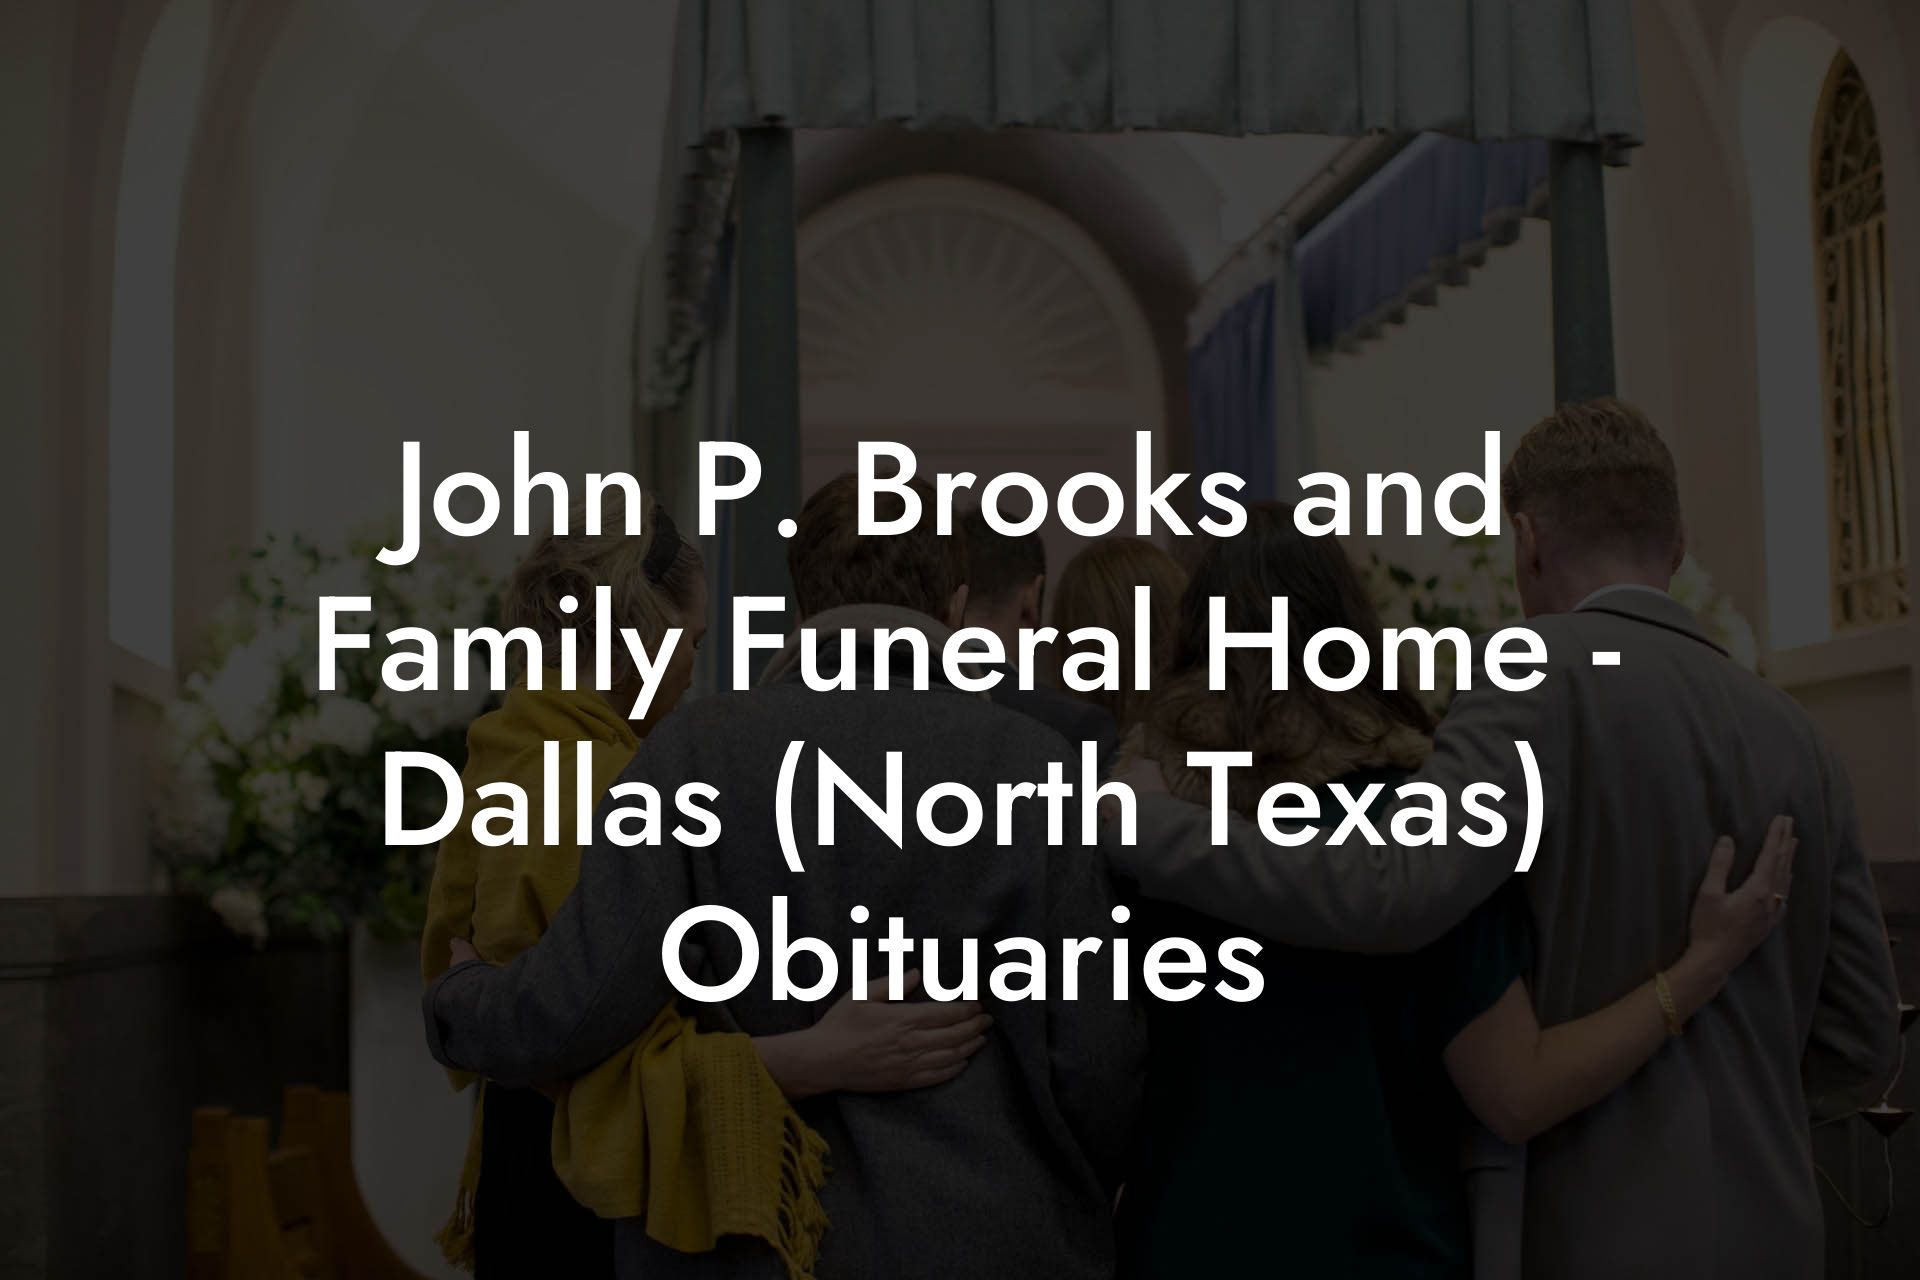 John P. Brooks and Family Funeral Home - Dallas (North Texas) Obituaries